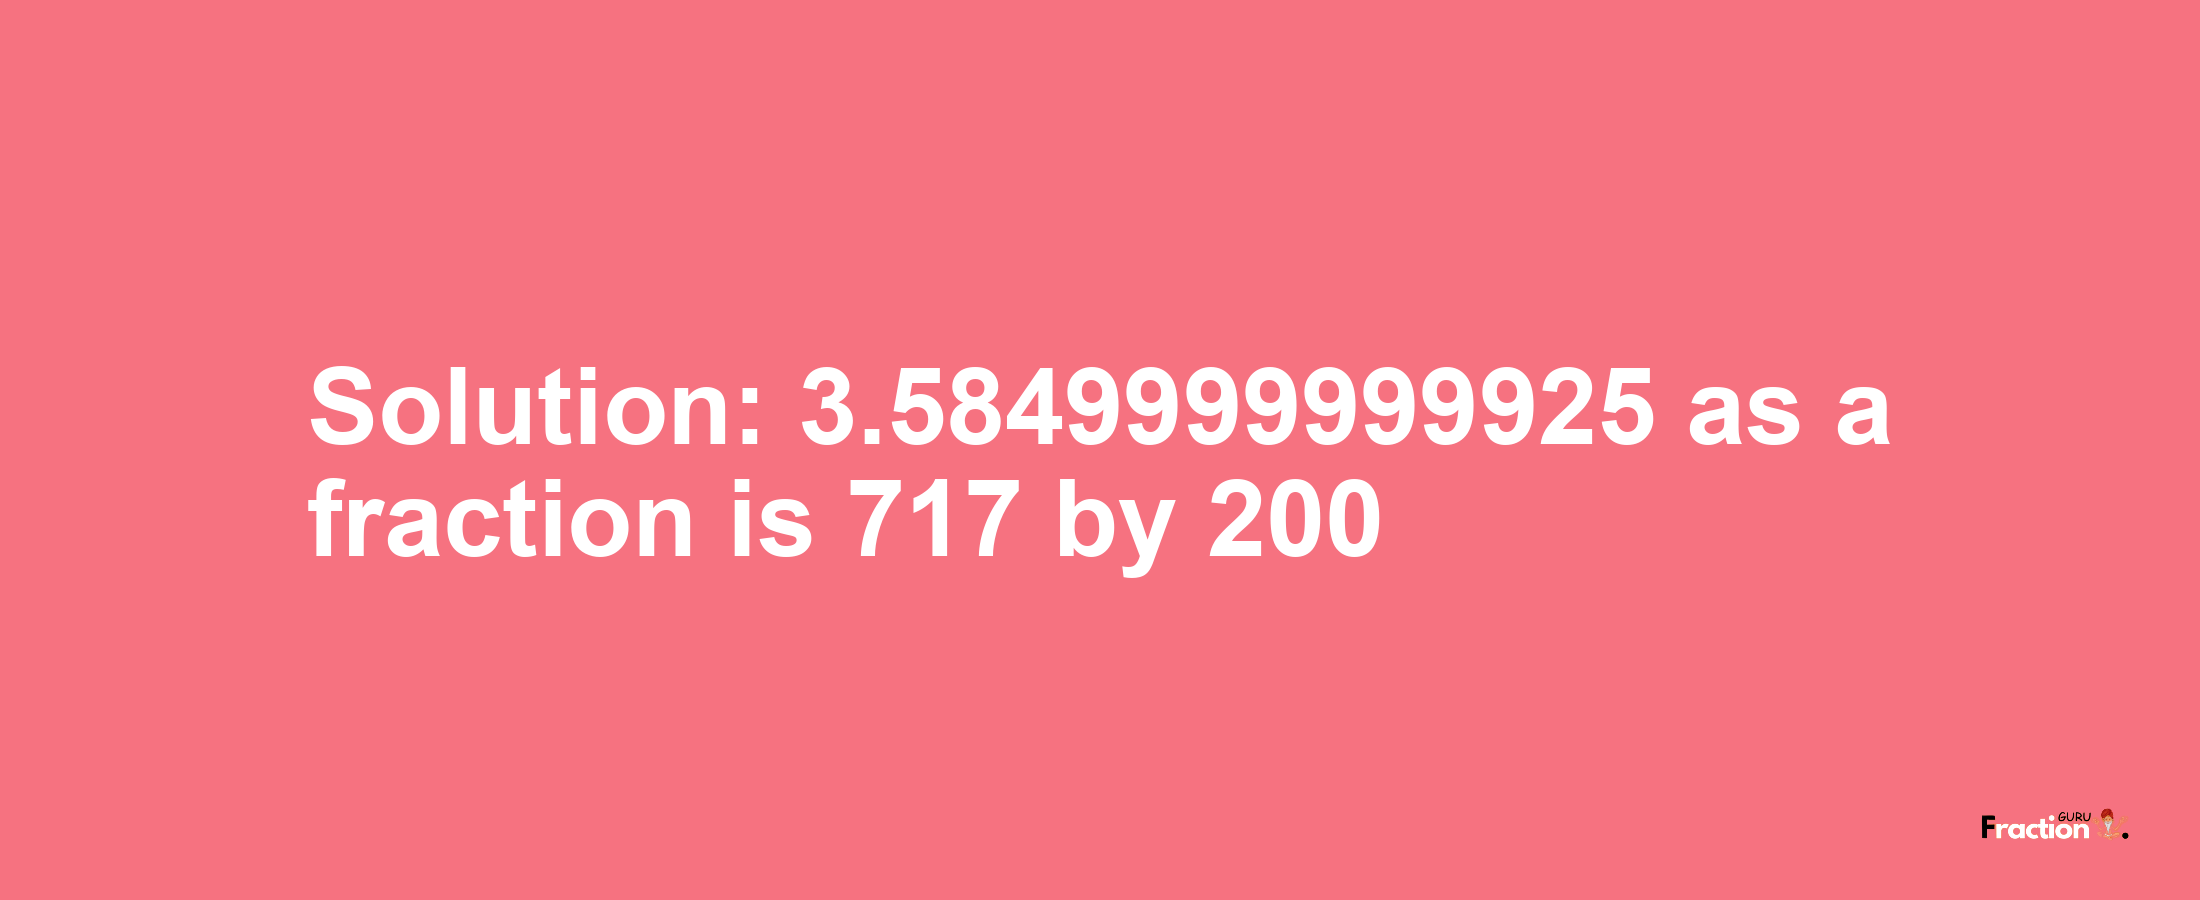 Solution:3.5849999999925 as a fraction is 717/200